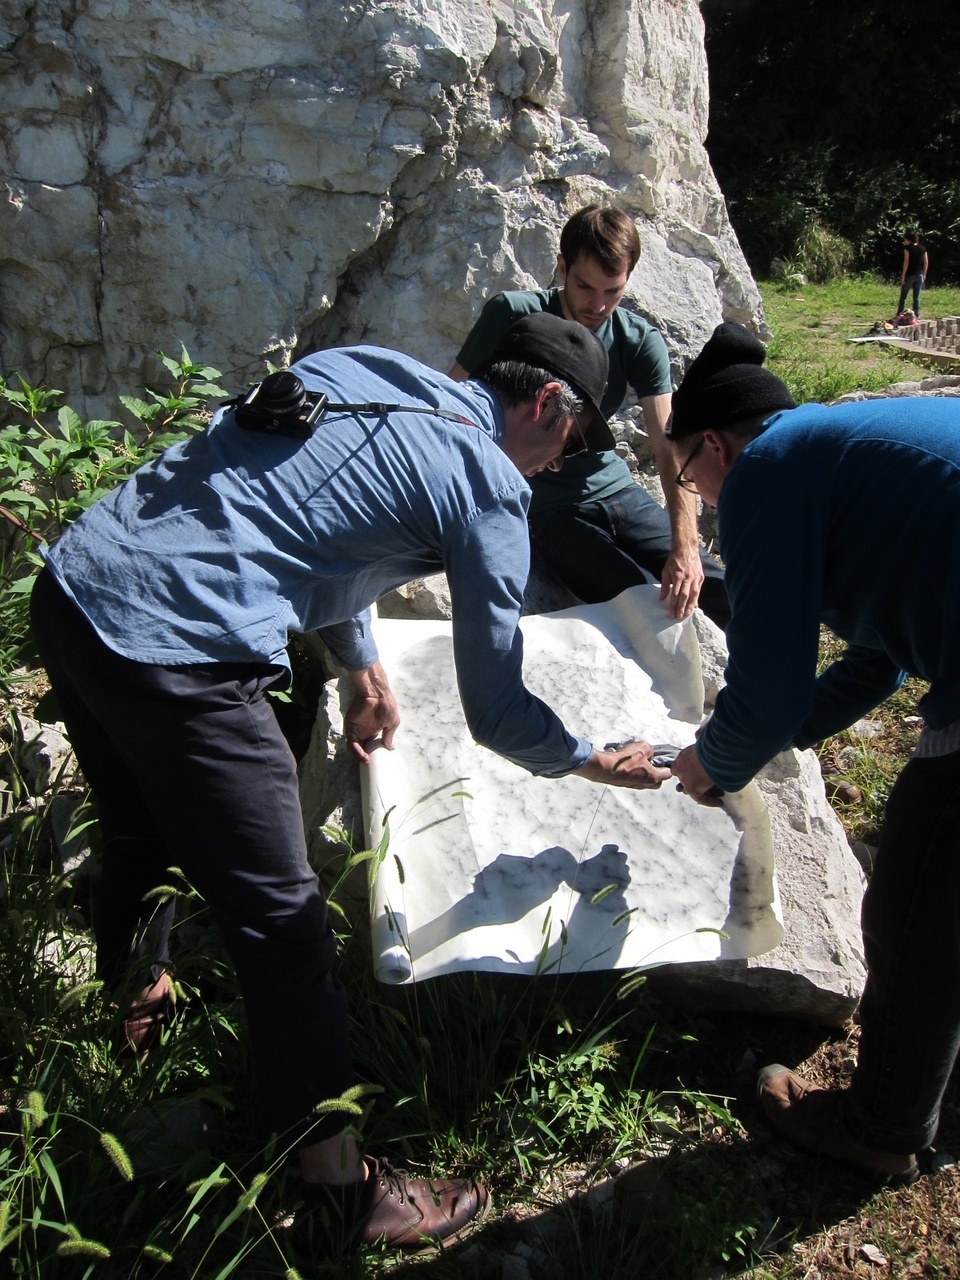 Shaun and two others hunched over examining a large piece of white paper pressed against a large rock